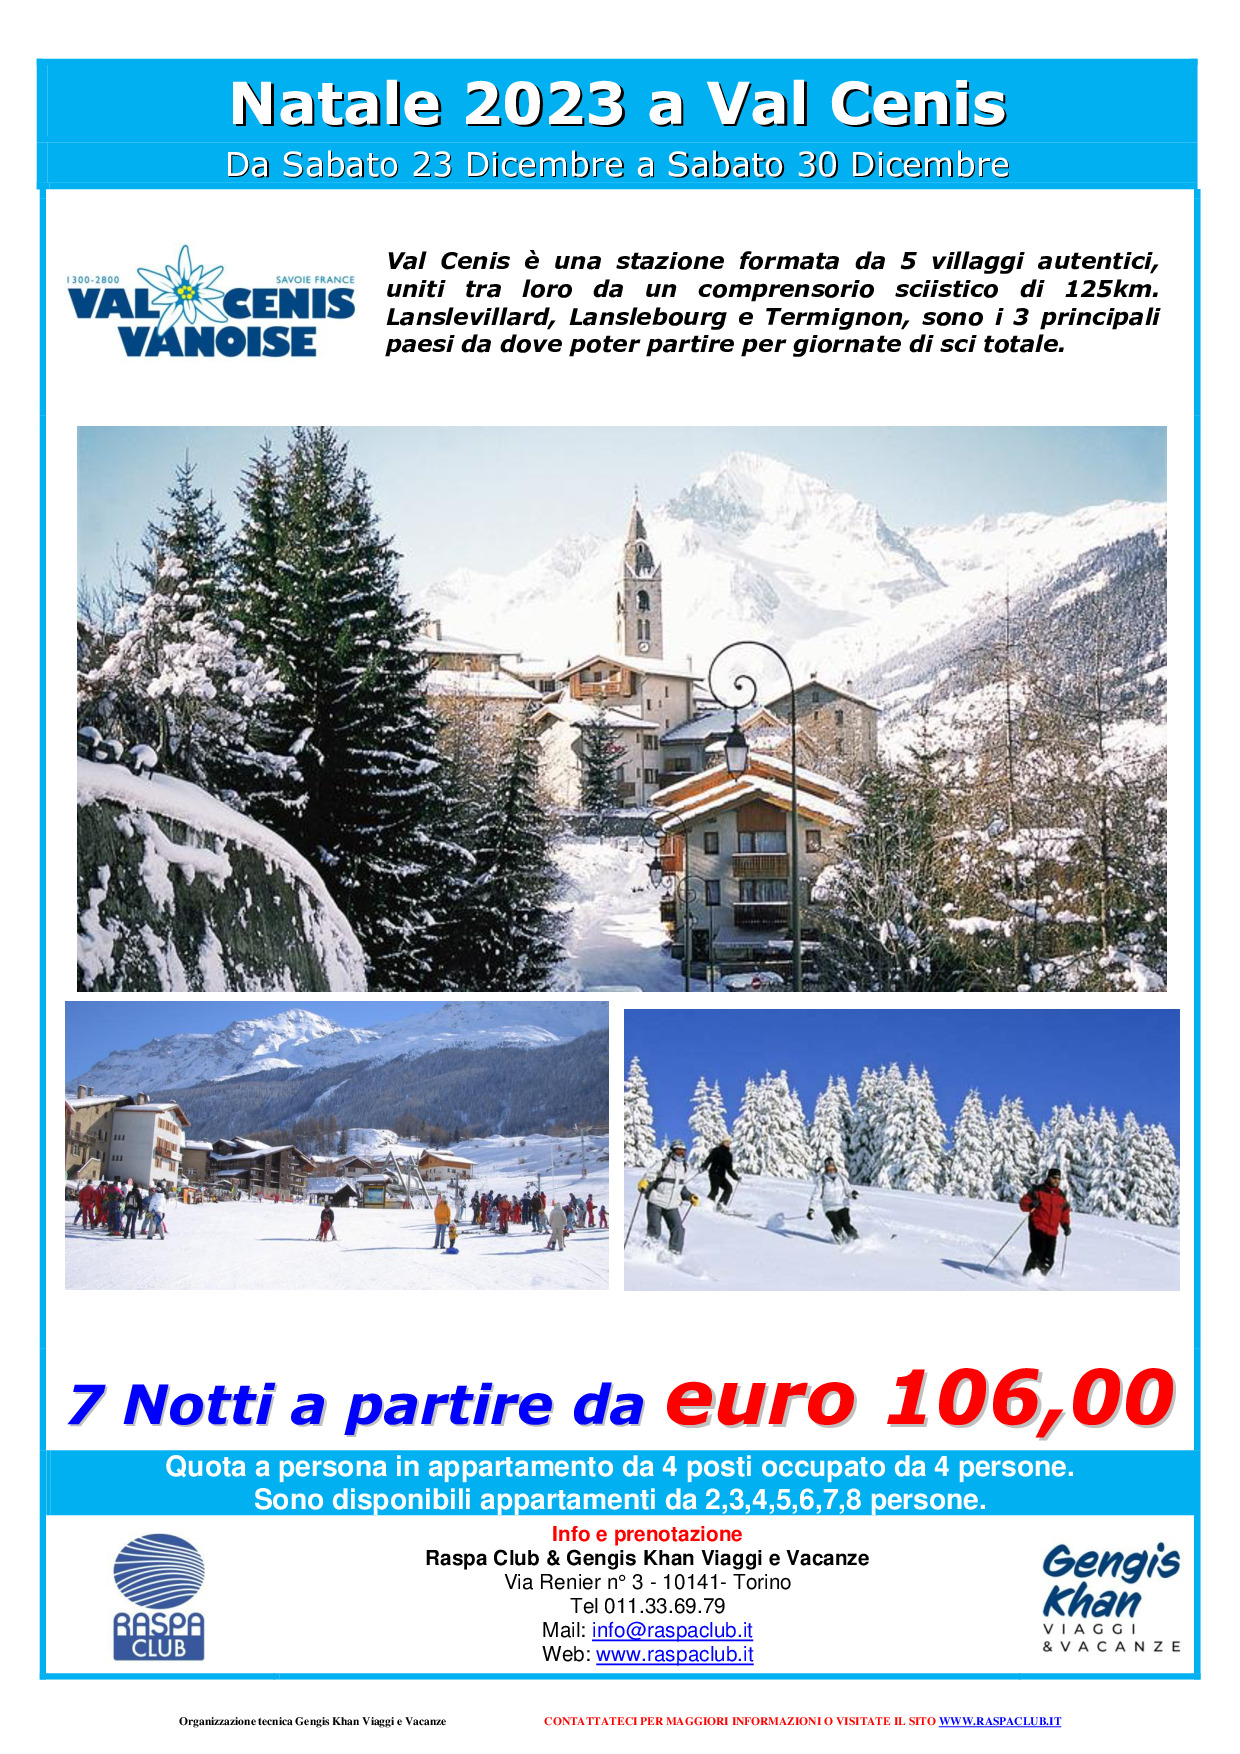 Natale a Val Cenis